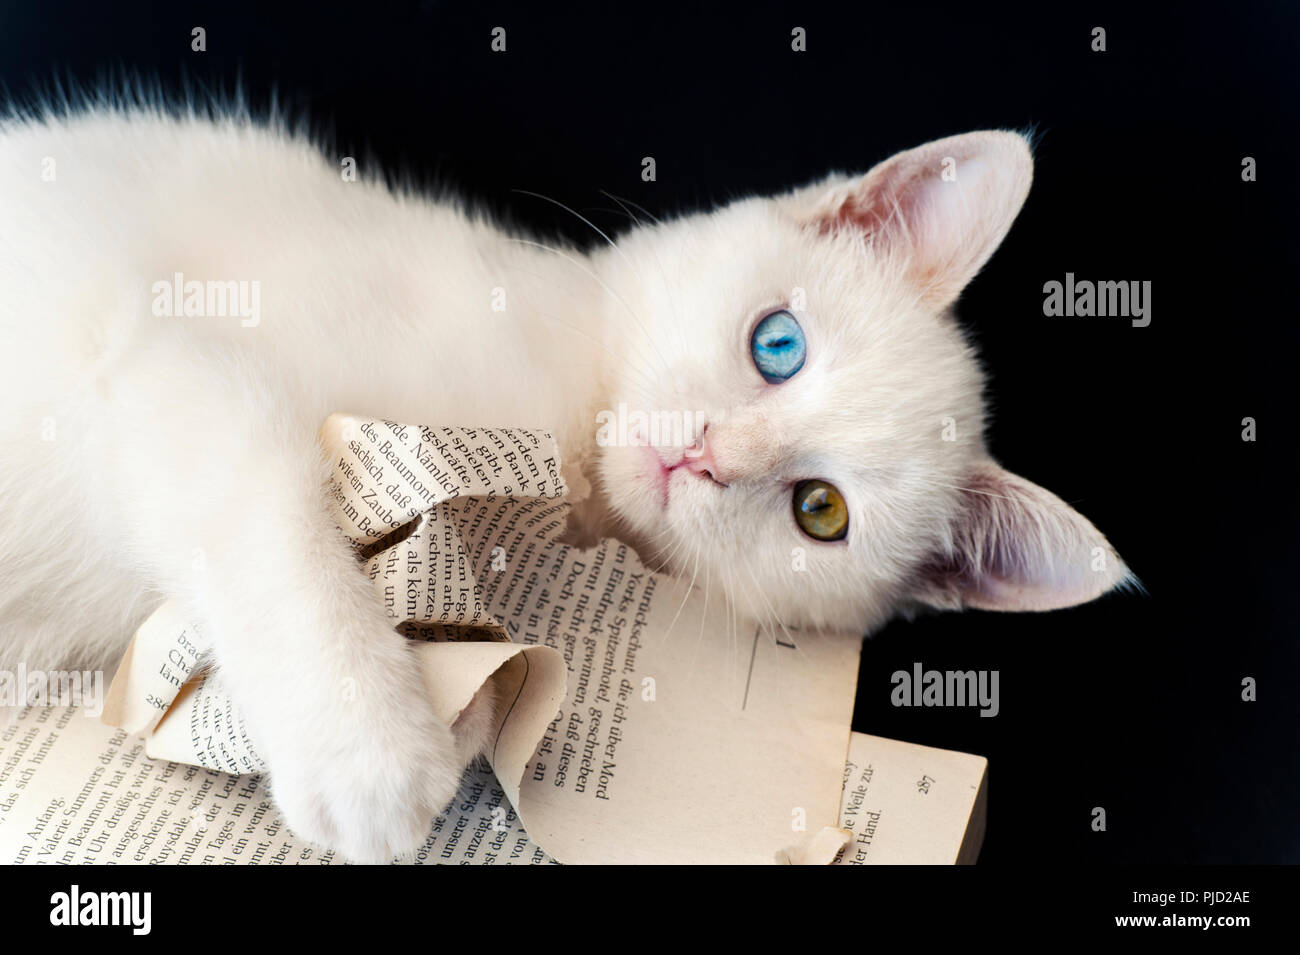 A beautiful white odd eyed kitten ripping a book against a black background Stock Photo